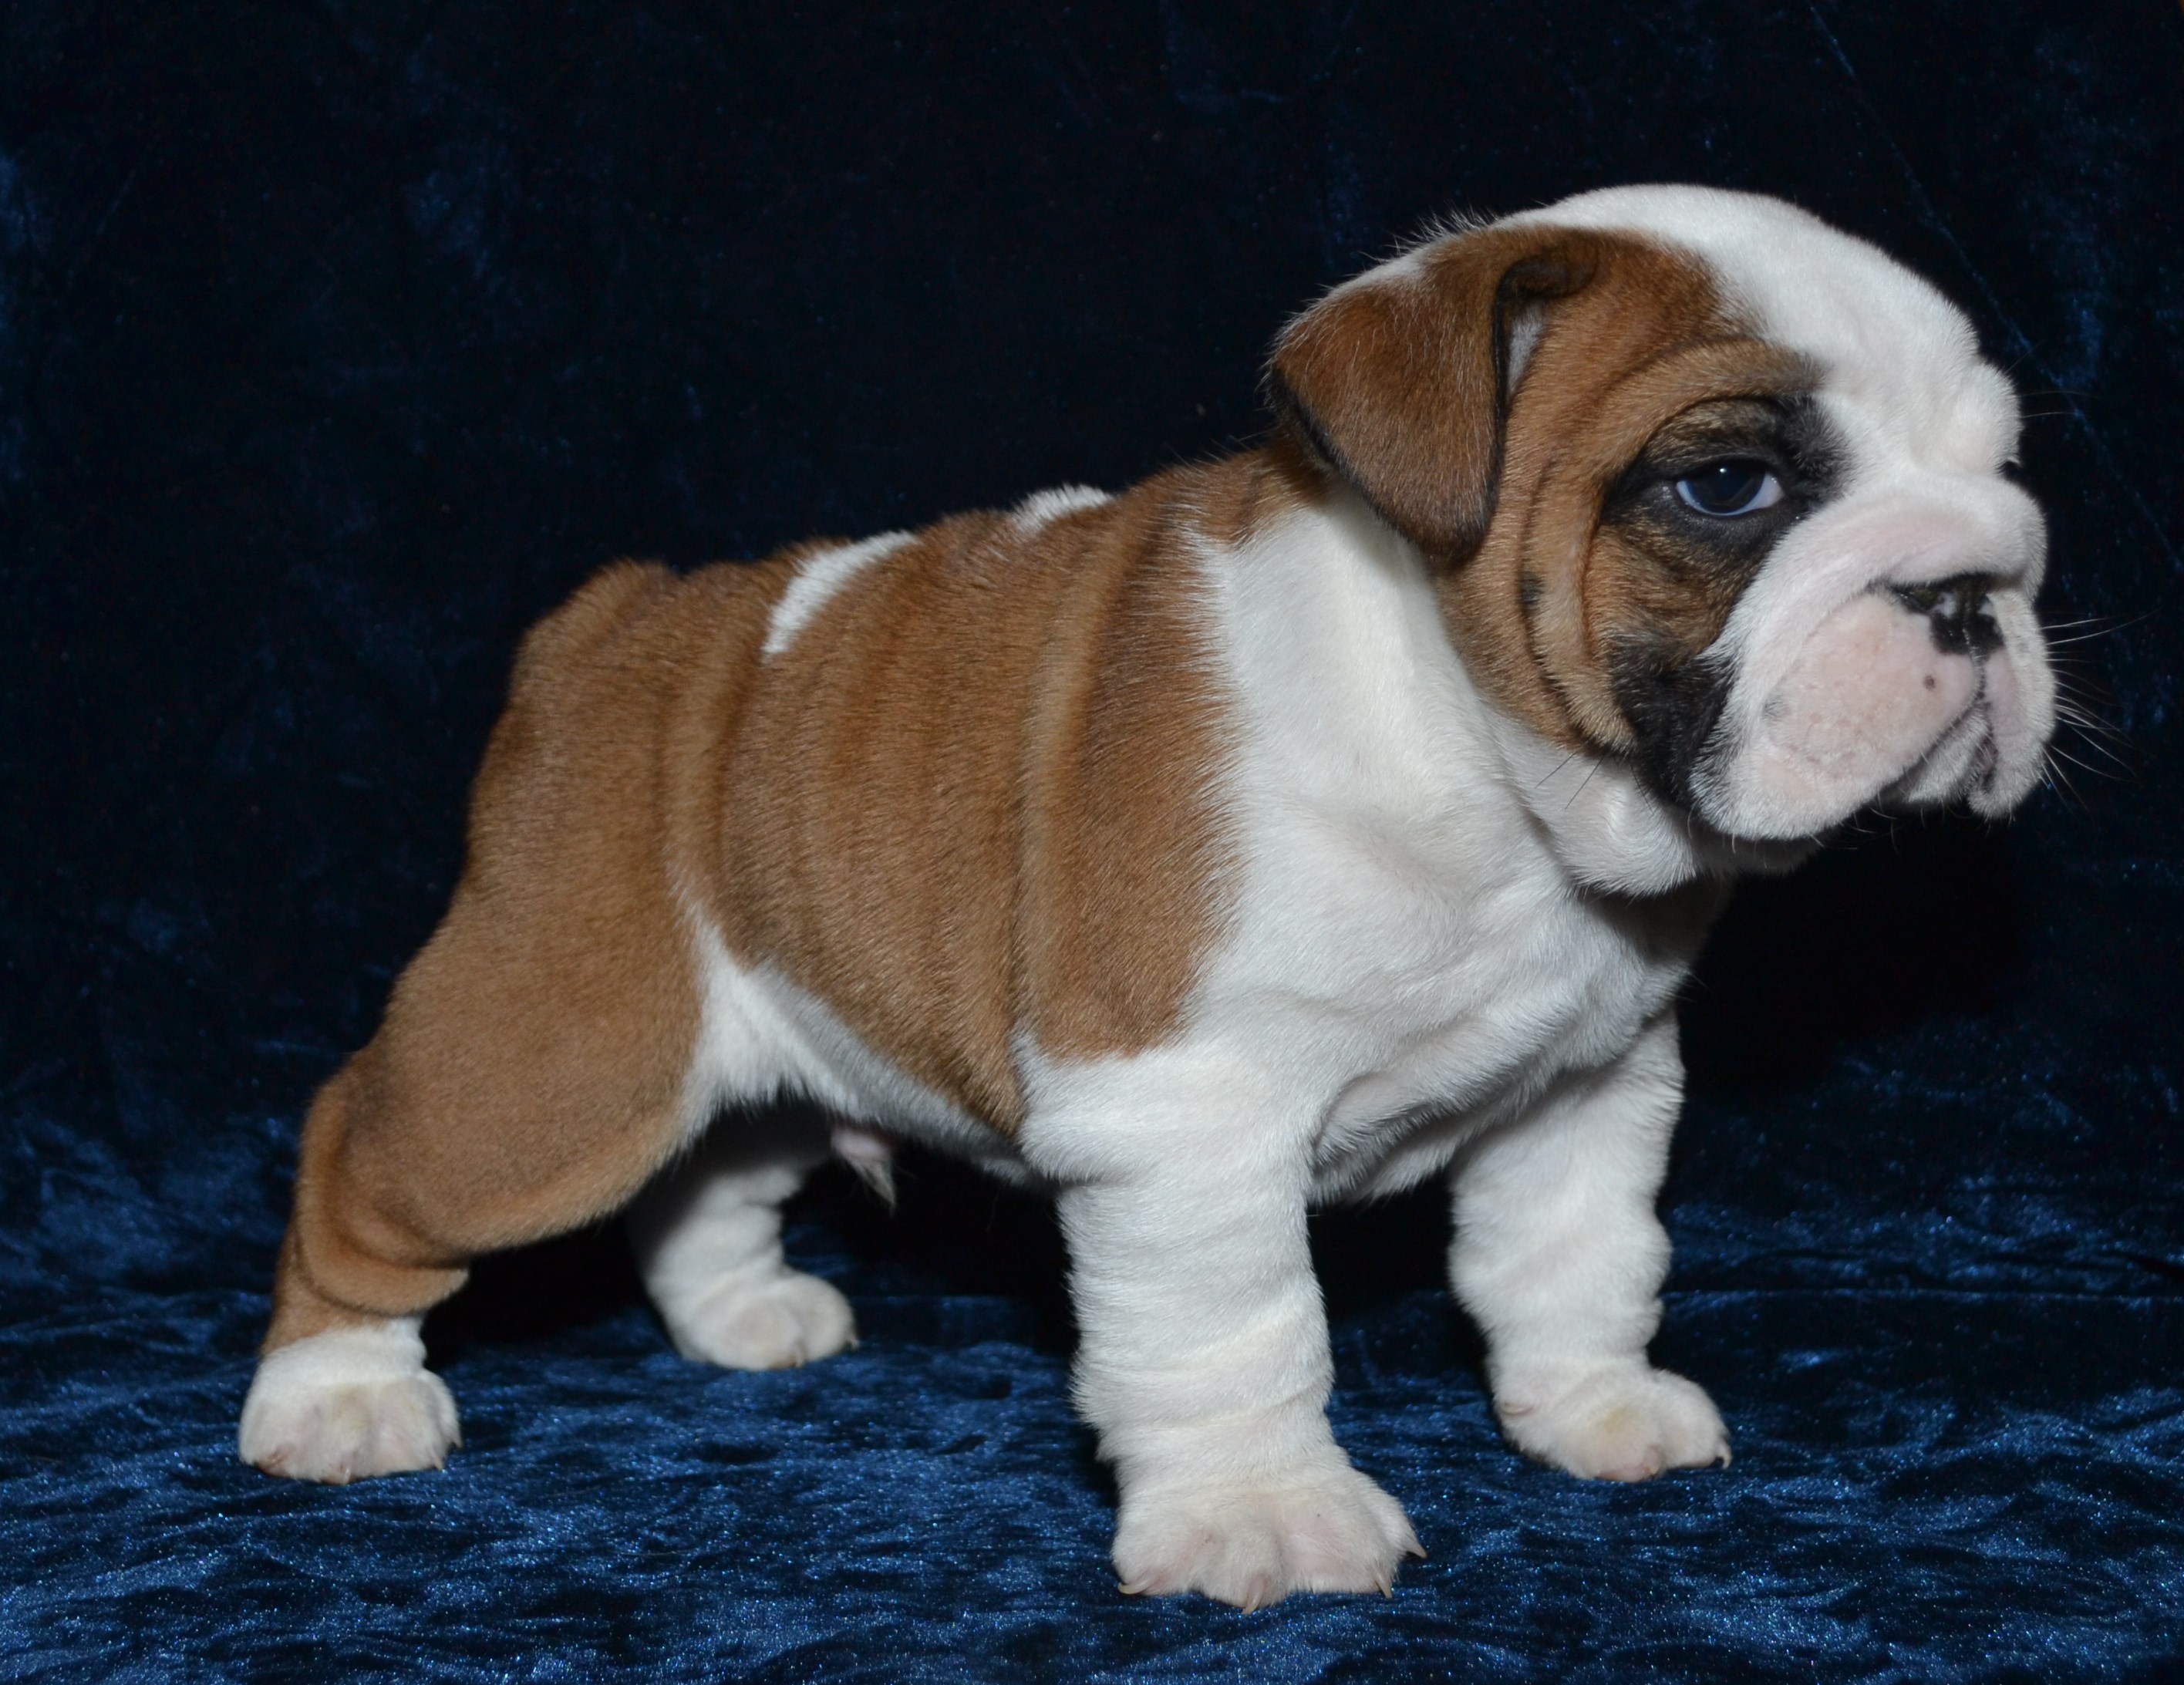 We have English Bulldog puppies that are carefully handraised in our home. There are males and females, and a variety of colors. They come pre-spoiled to you ready to be babied and pampered. Our puppies do come with a health guarantee, and I can provide many references. We take allot of personal time to care for our babies and socialize them with all types of people. Please email for questions for pics. 